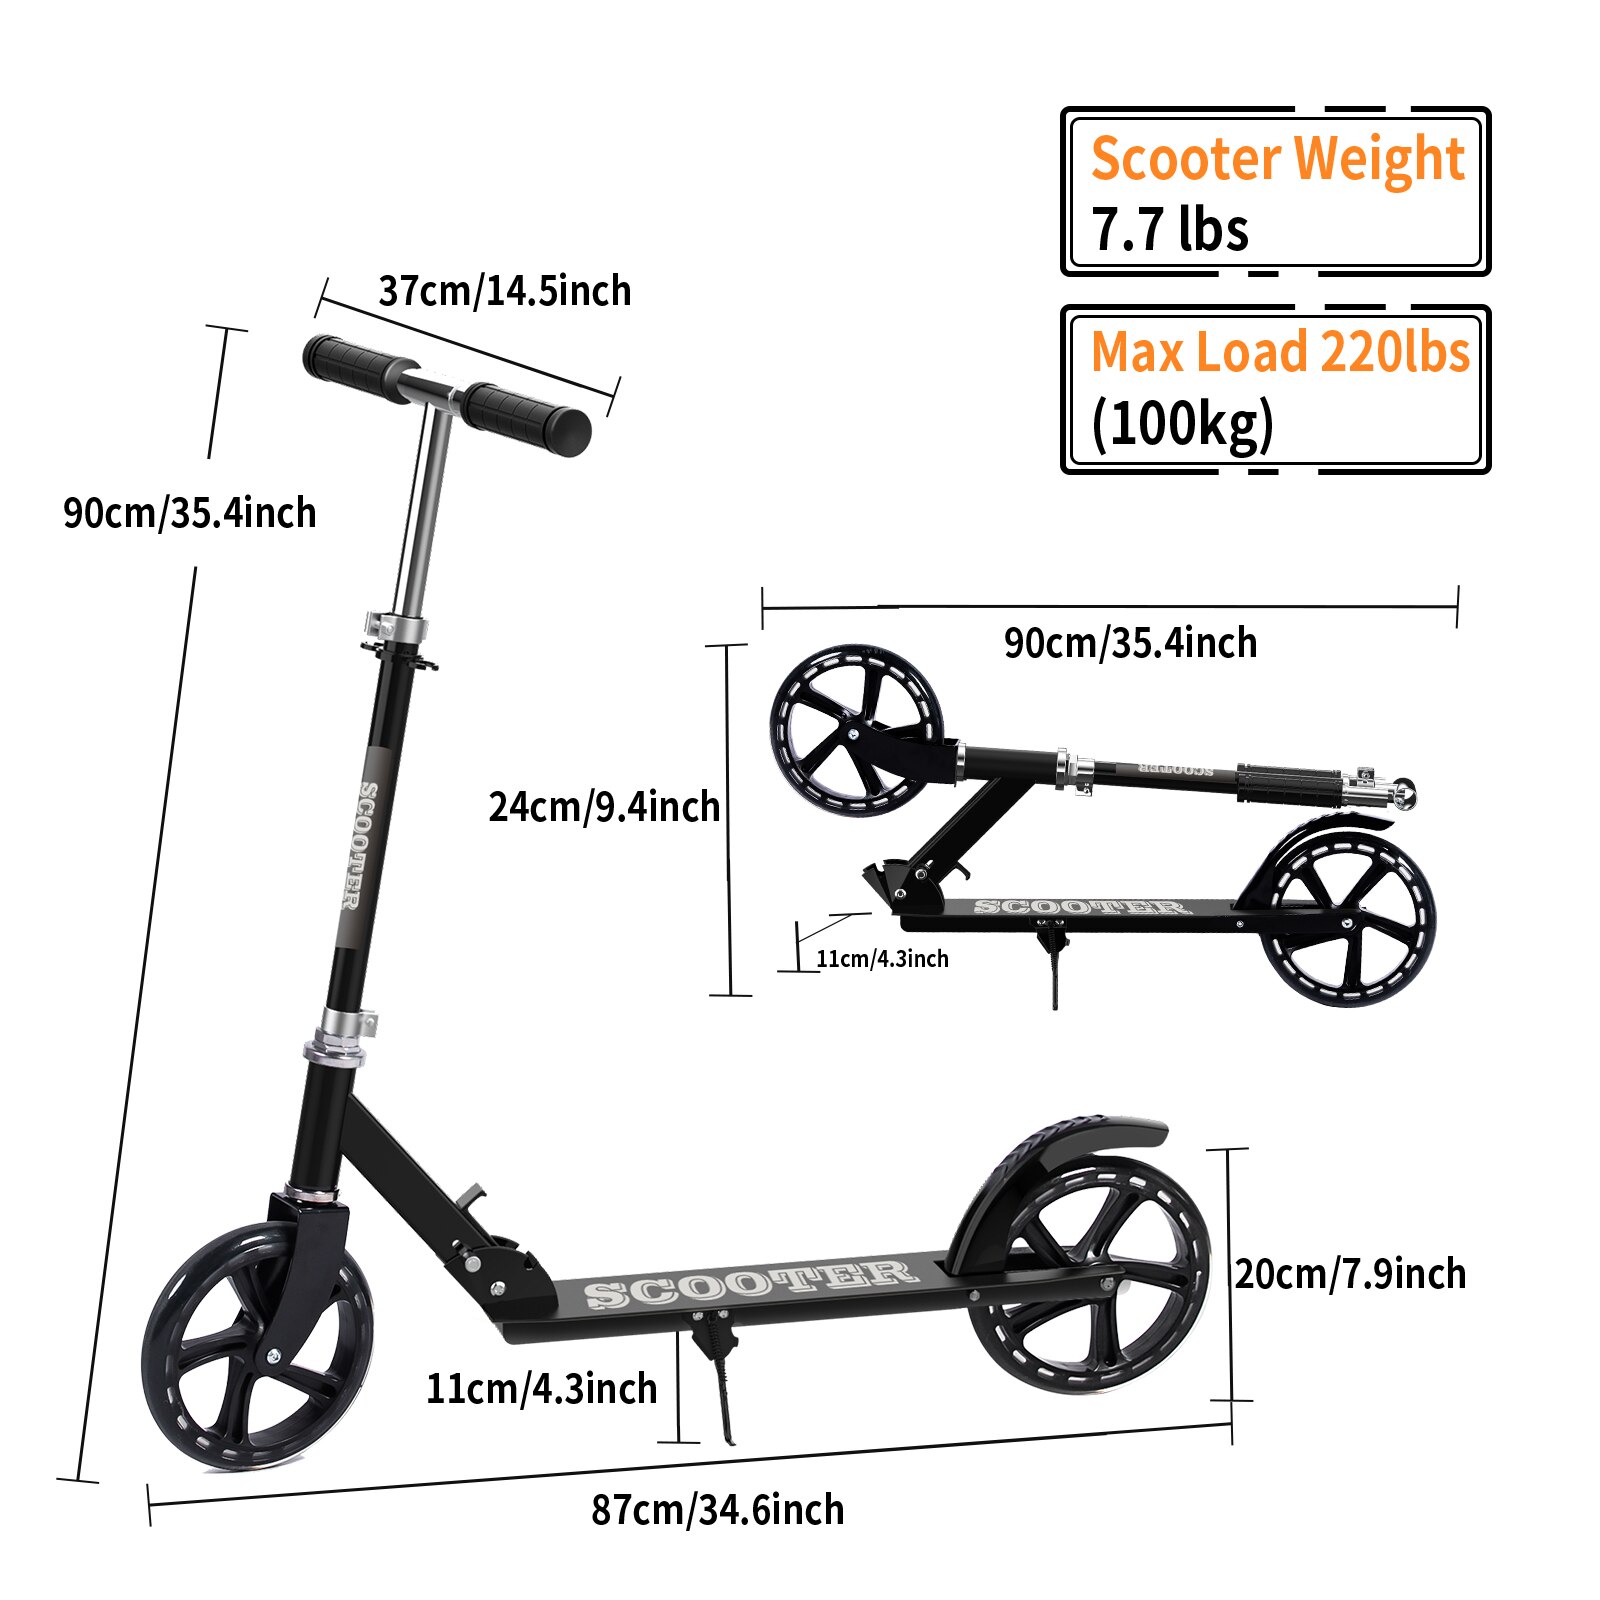 Scooter for Adults and Kids, Foldable Scooter 2 Wheel, Folding Grips Handlebar Adjusts to 3 Heights, 220 Lbs Weight Capacity